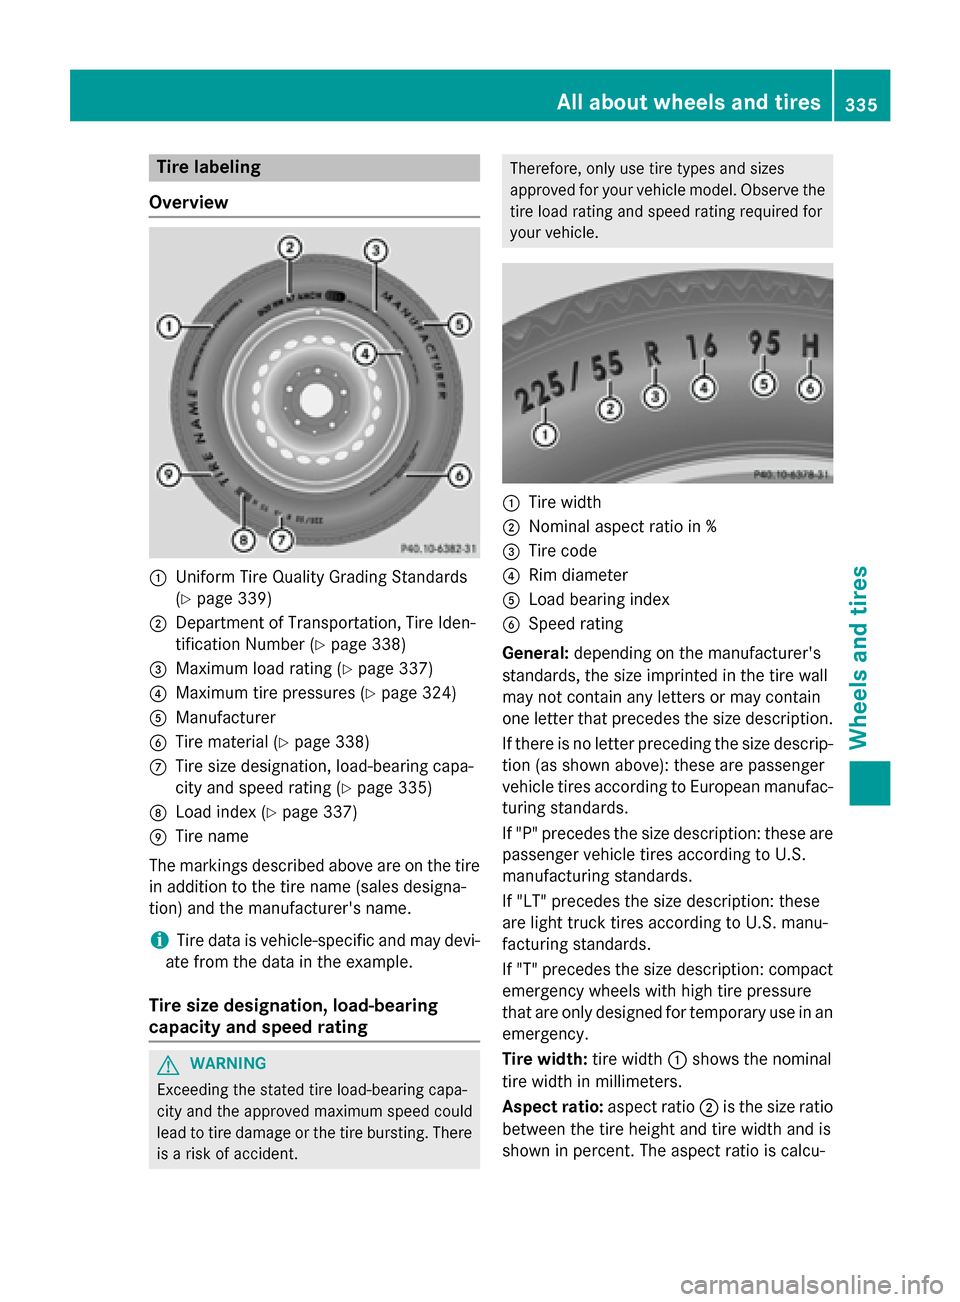 MERCEDES-BENZ CLA-Class 2015 C117 Owners Manual Tire labeling
Overview :
Uniform Tire Quality Grading Standards
(Y page 339)
; Department of Transportation, Tire Iden-
tification Number (Y page 338)
= Maximum load rating (Y page 337)
? Maximum tire